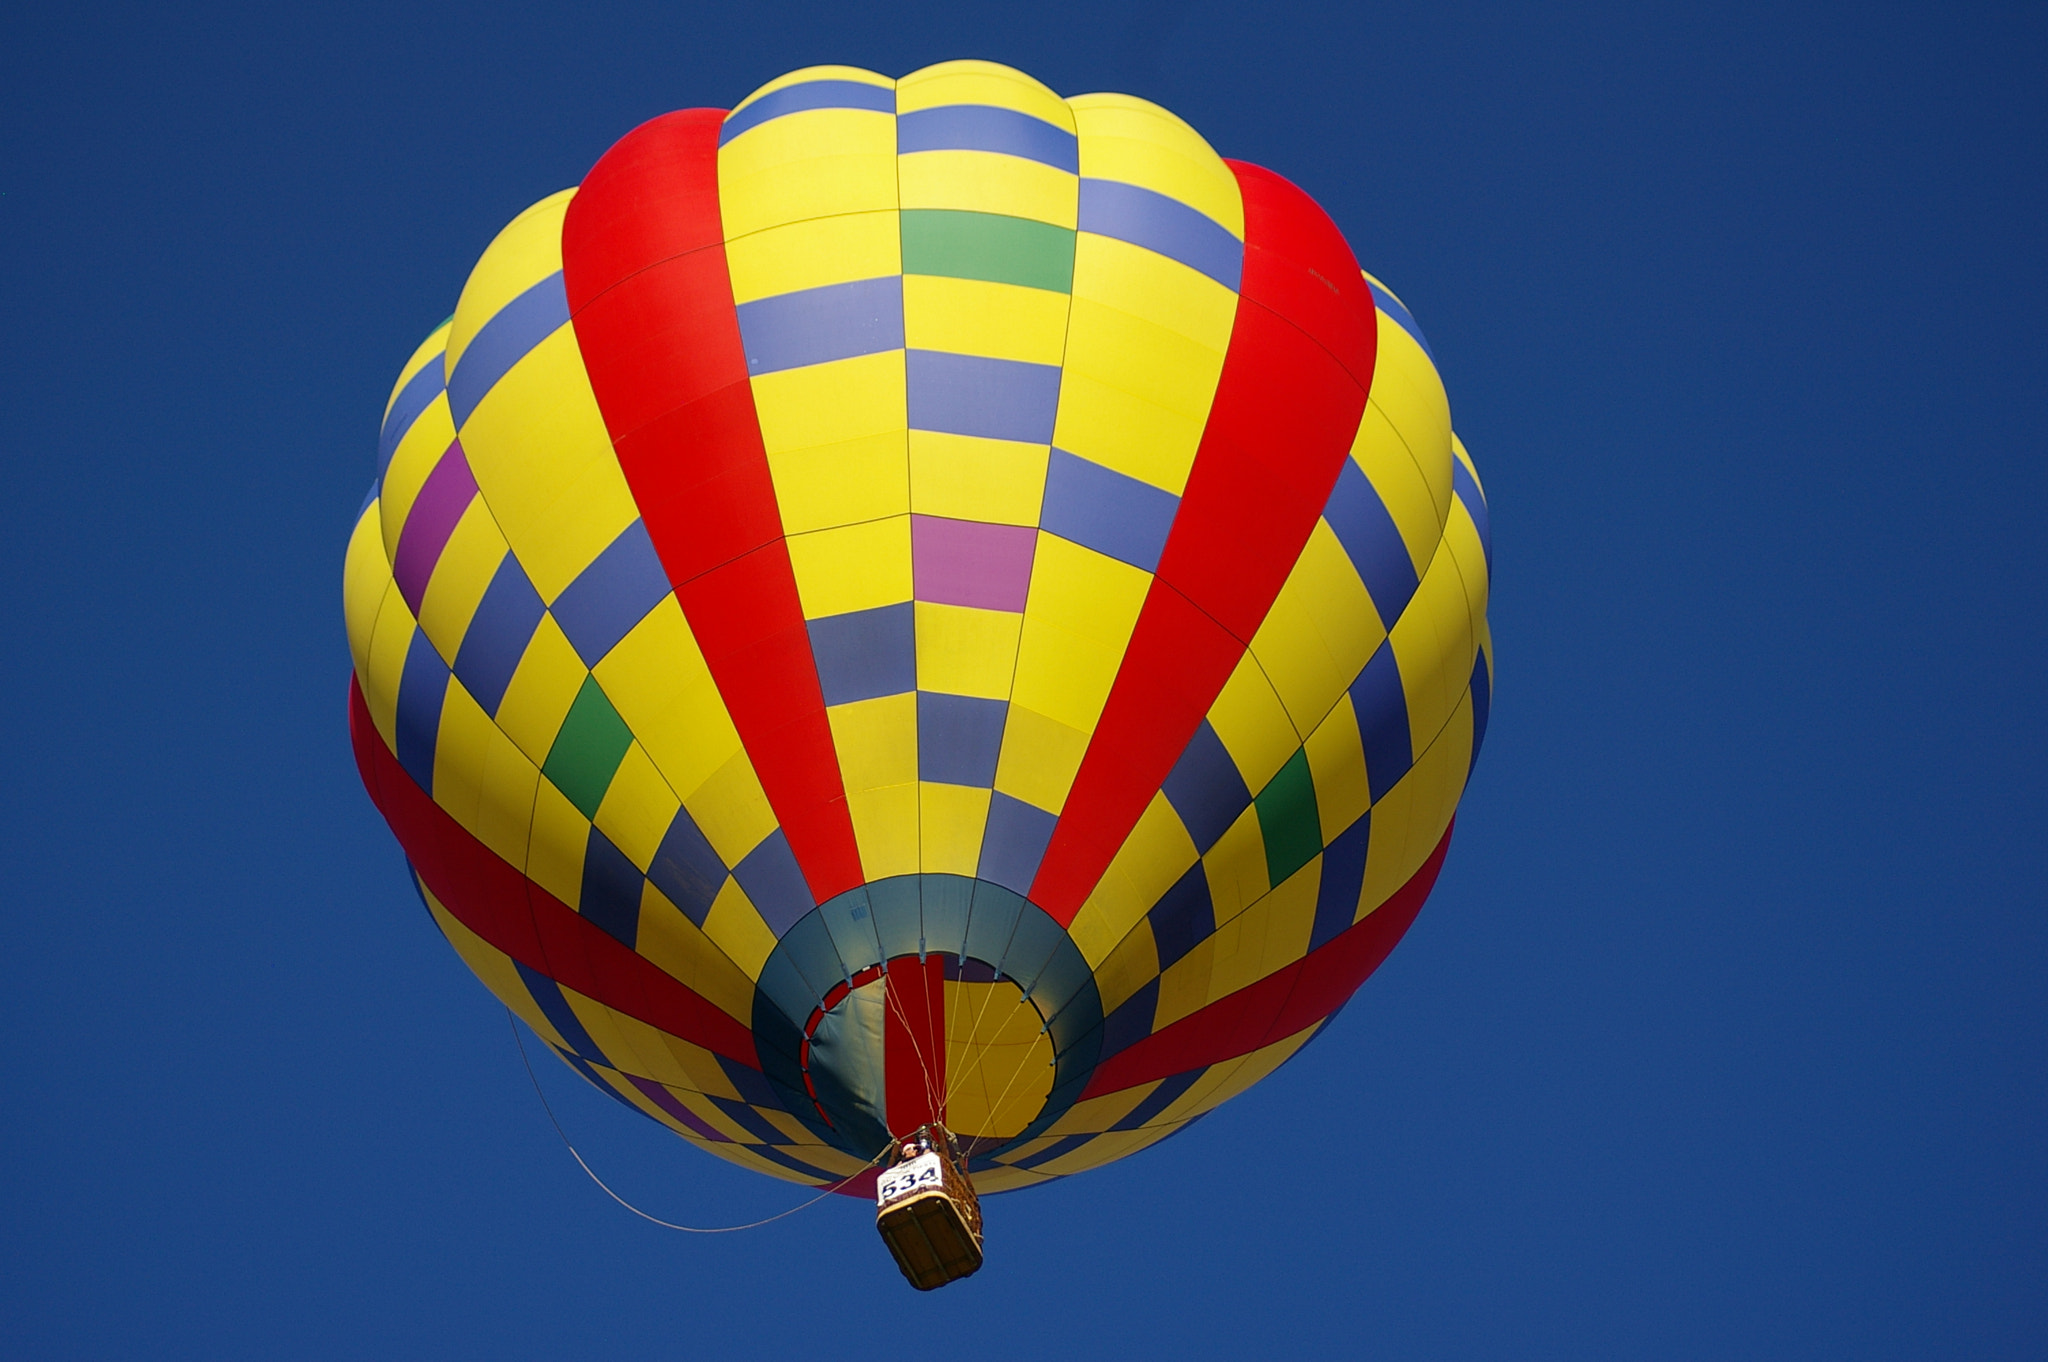 Pentax *ist DL sample photo. Hot air balloon takes off at sunrise photography